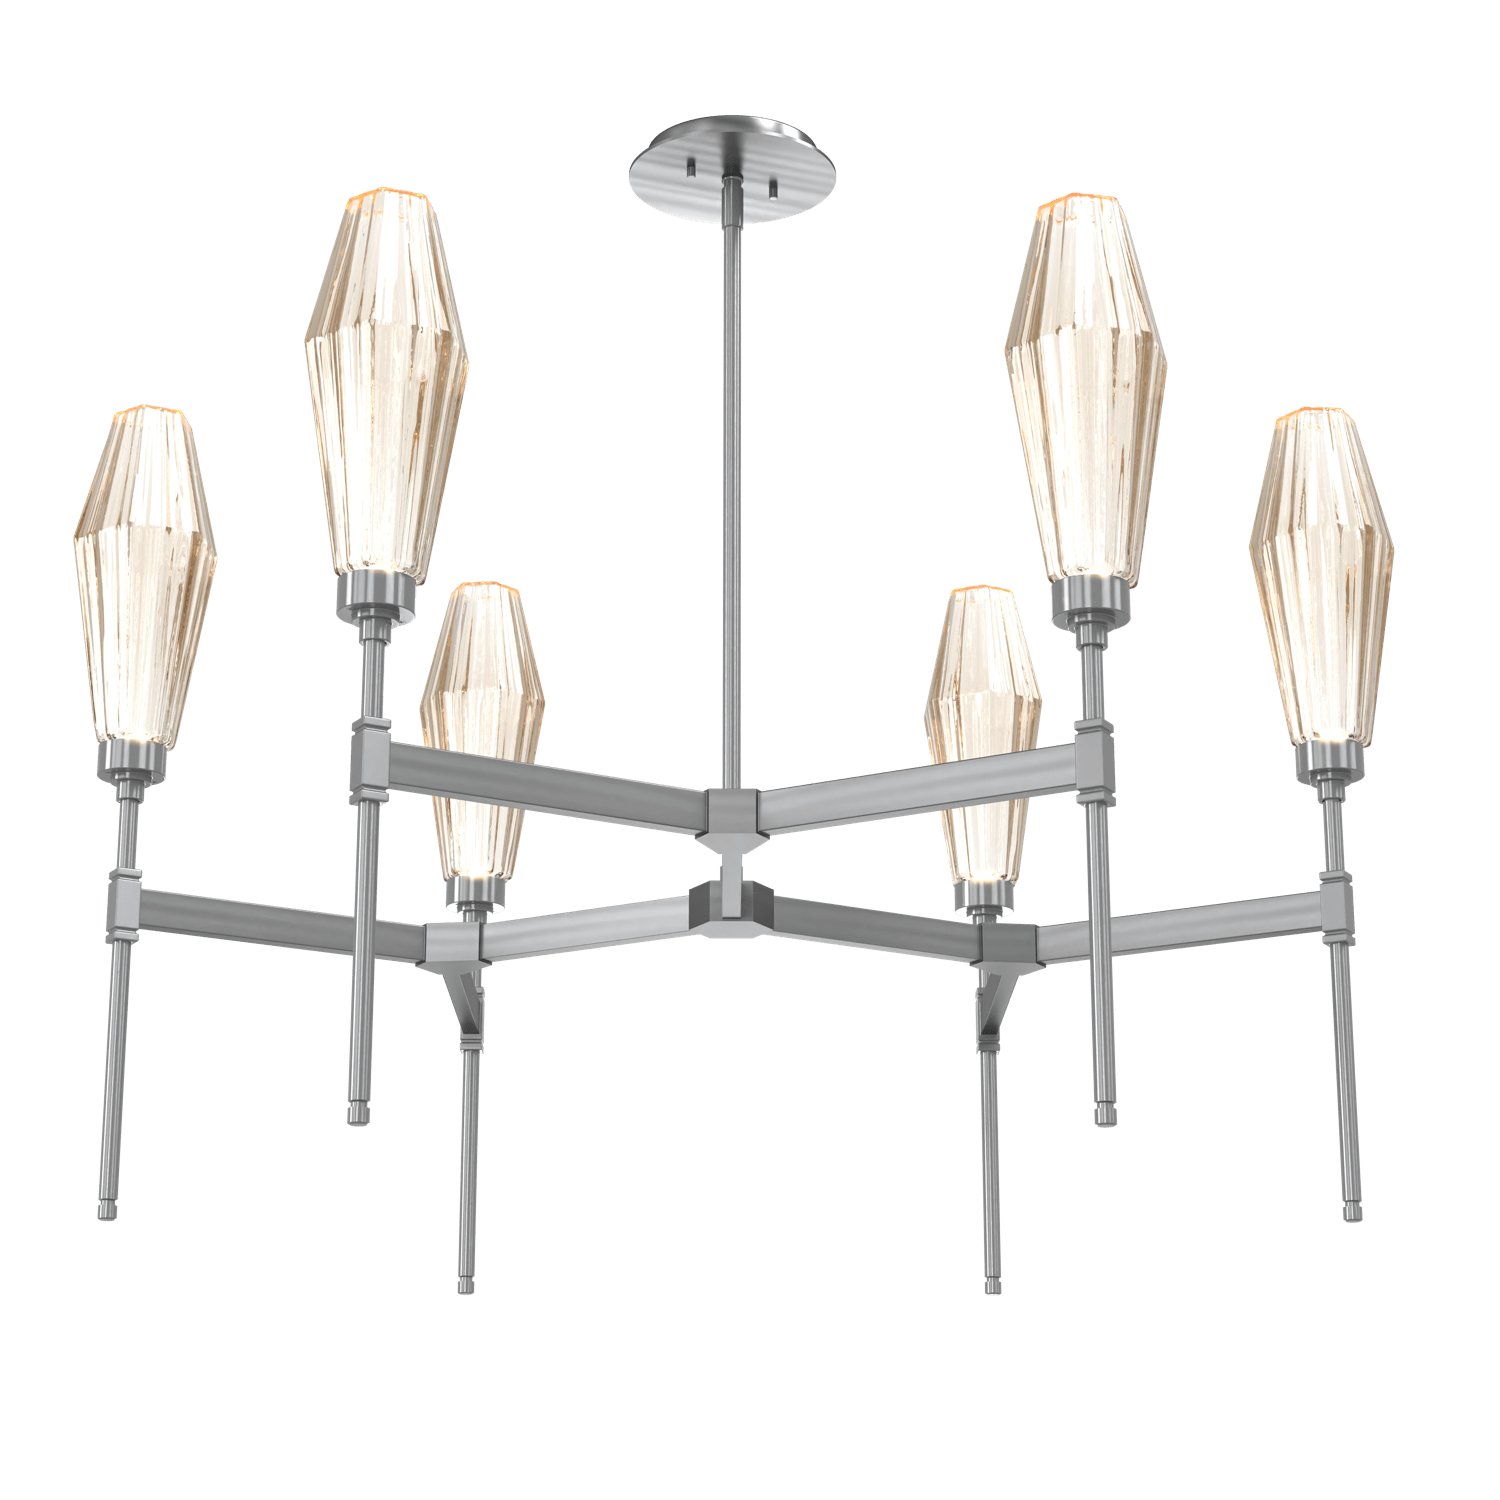 CHB0049-37-GM-RA-Hammerton-Studio-Aalto-37-inch-round-belvedere-chandelier-with-gunmetal-finish-and-optic-ribbed-amber-glass-shades-and-LED-lamping